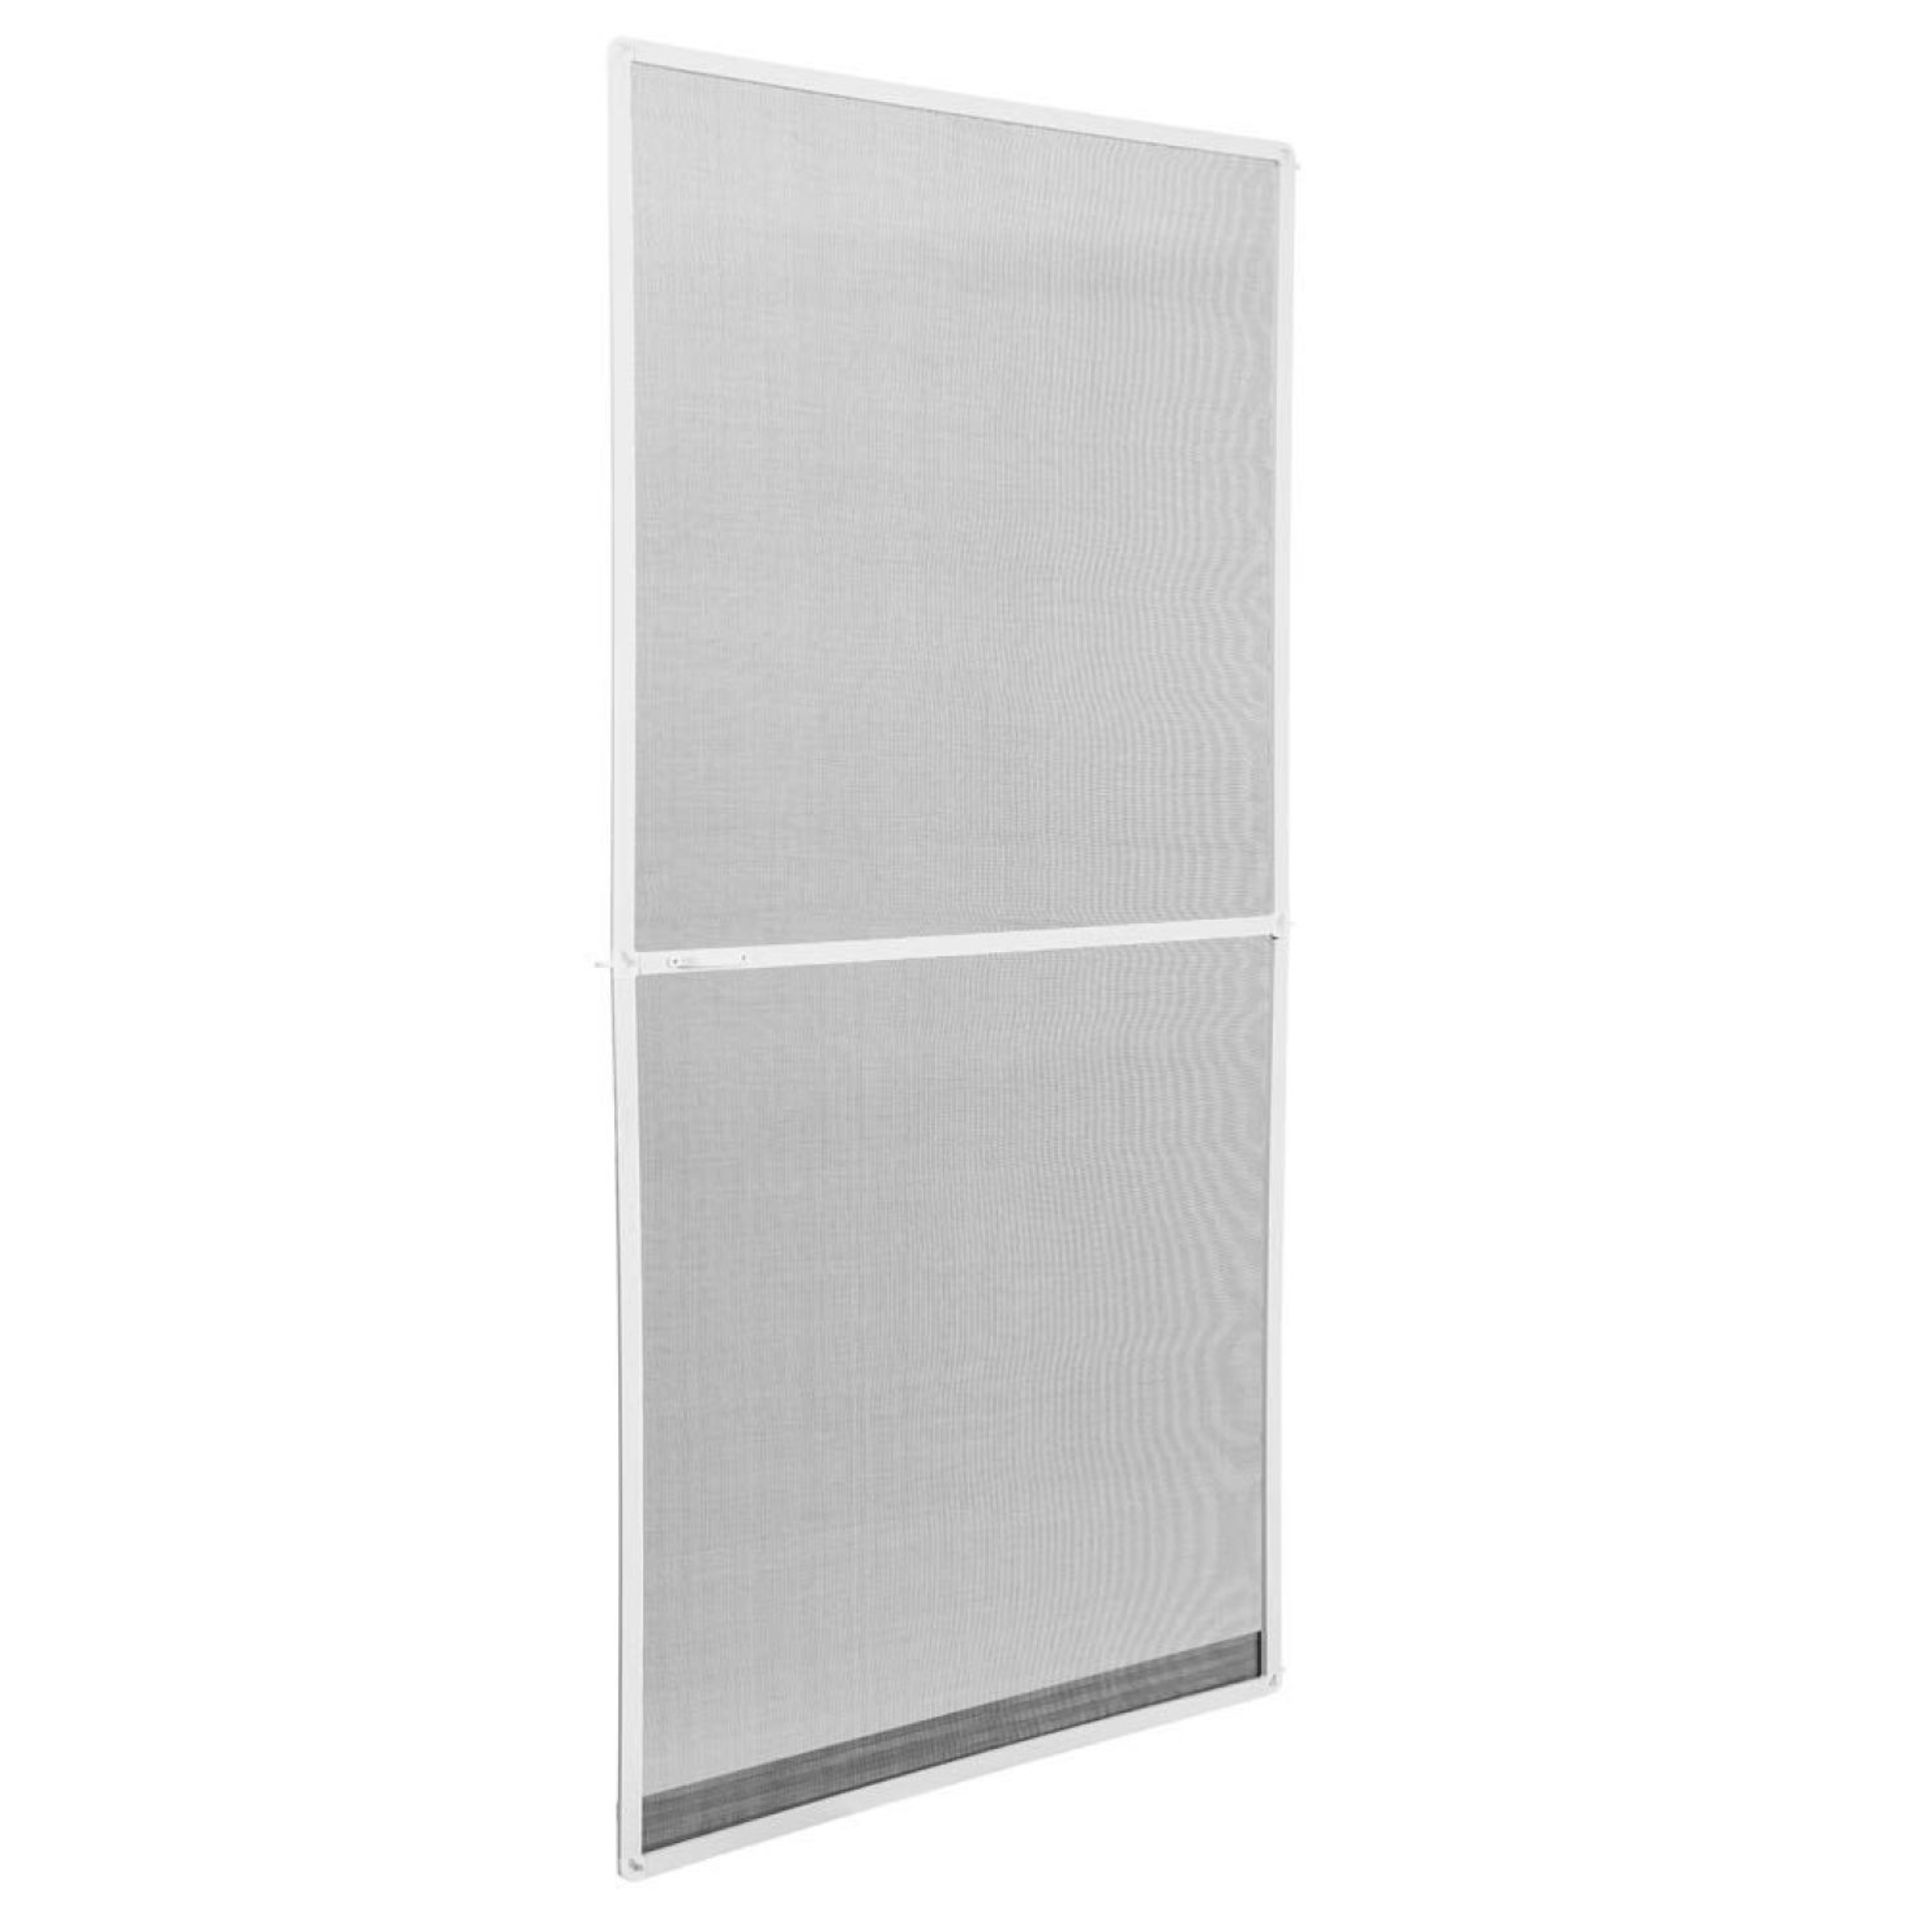 Tectake - Fly Screen For Door Frame White - Boxed. RRP £33.99 - Image 2 of 2